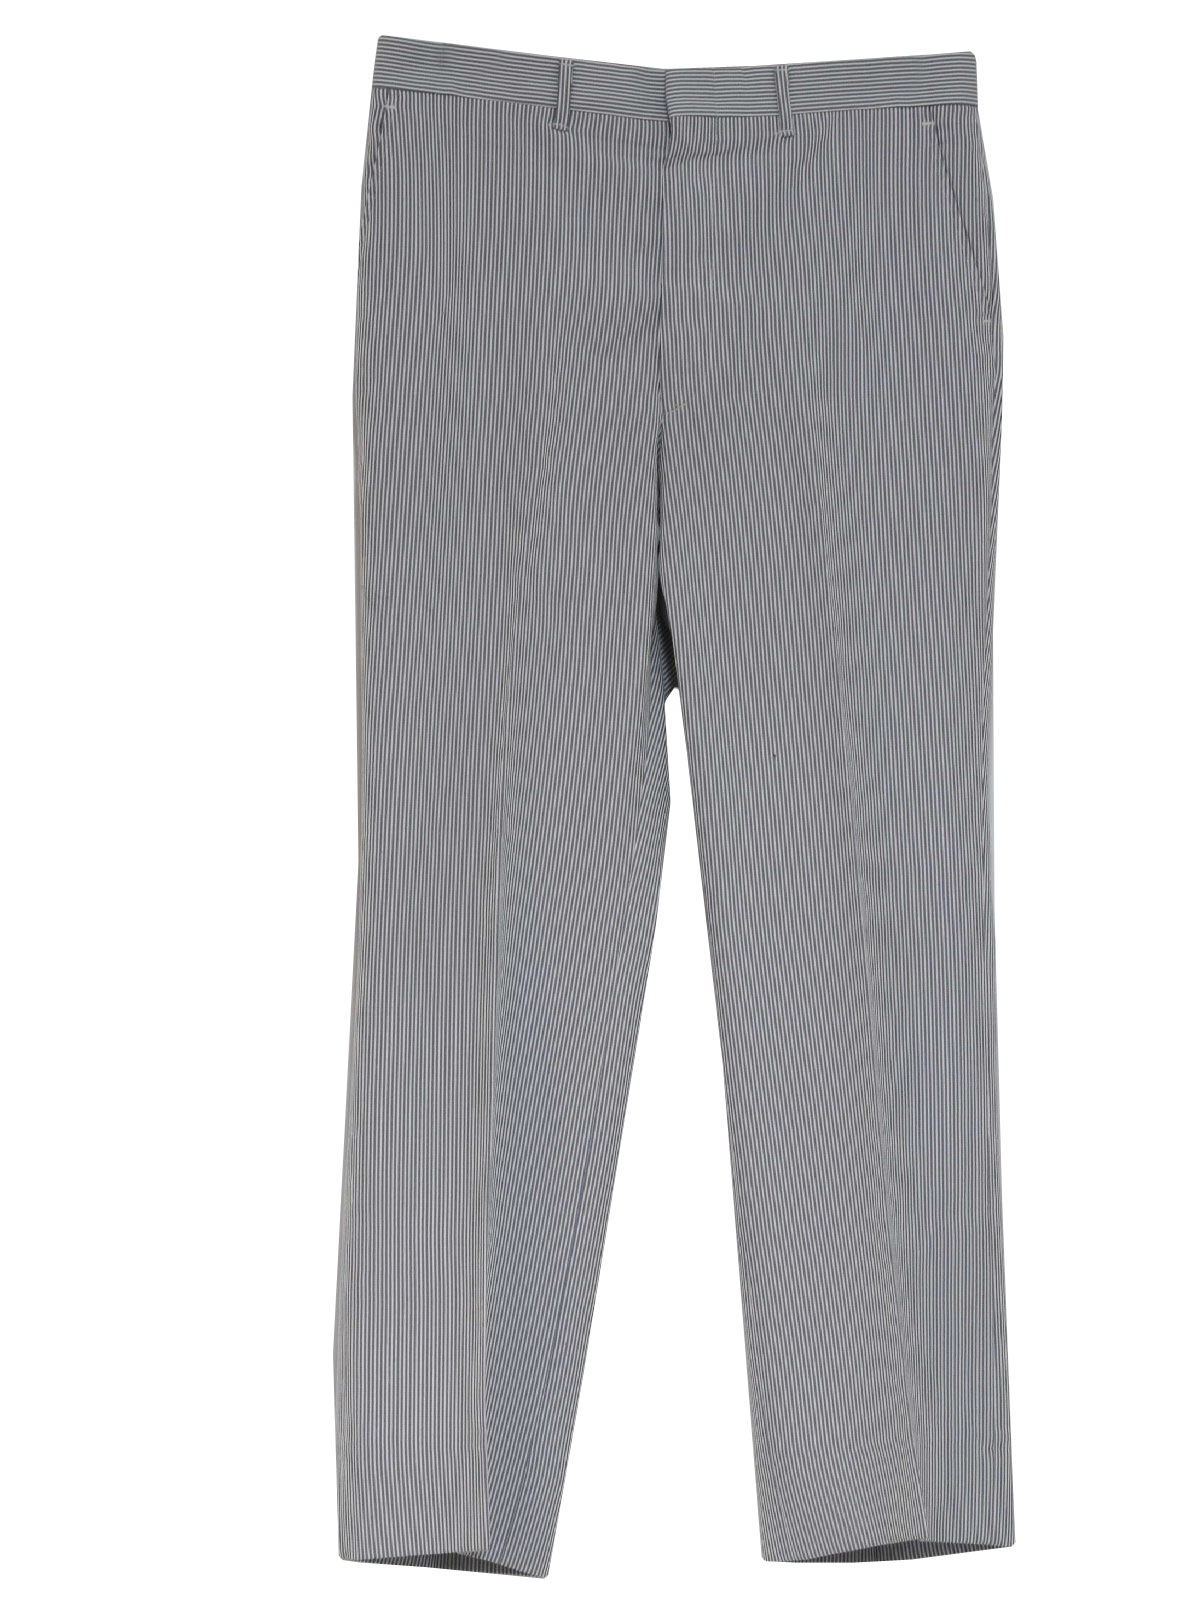 Vintage 70s Pants: 70s -Care label- Mens sky blue and white pin striped ...